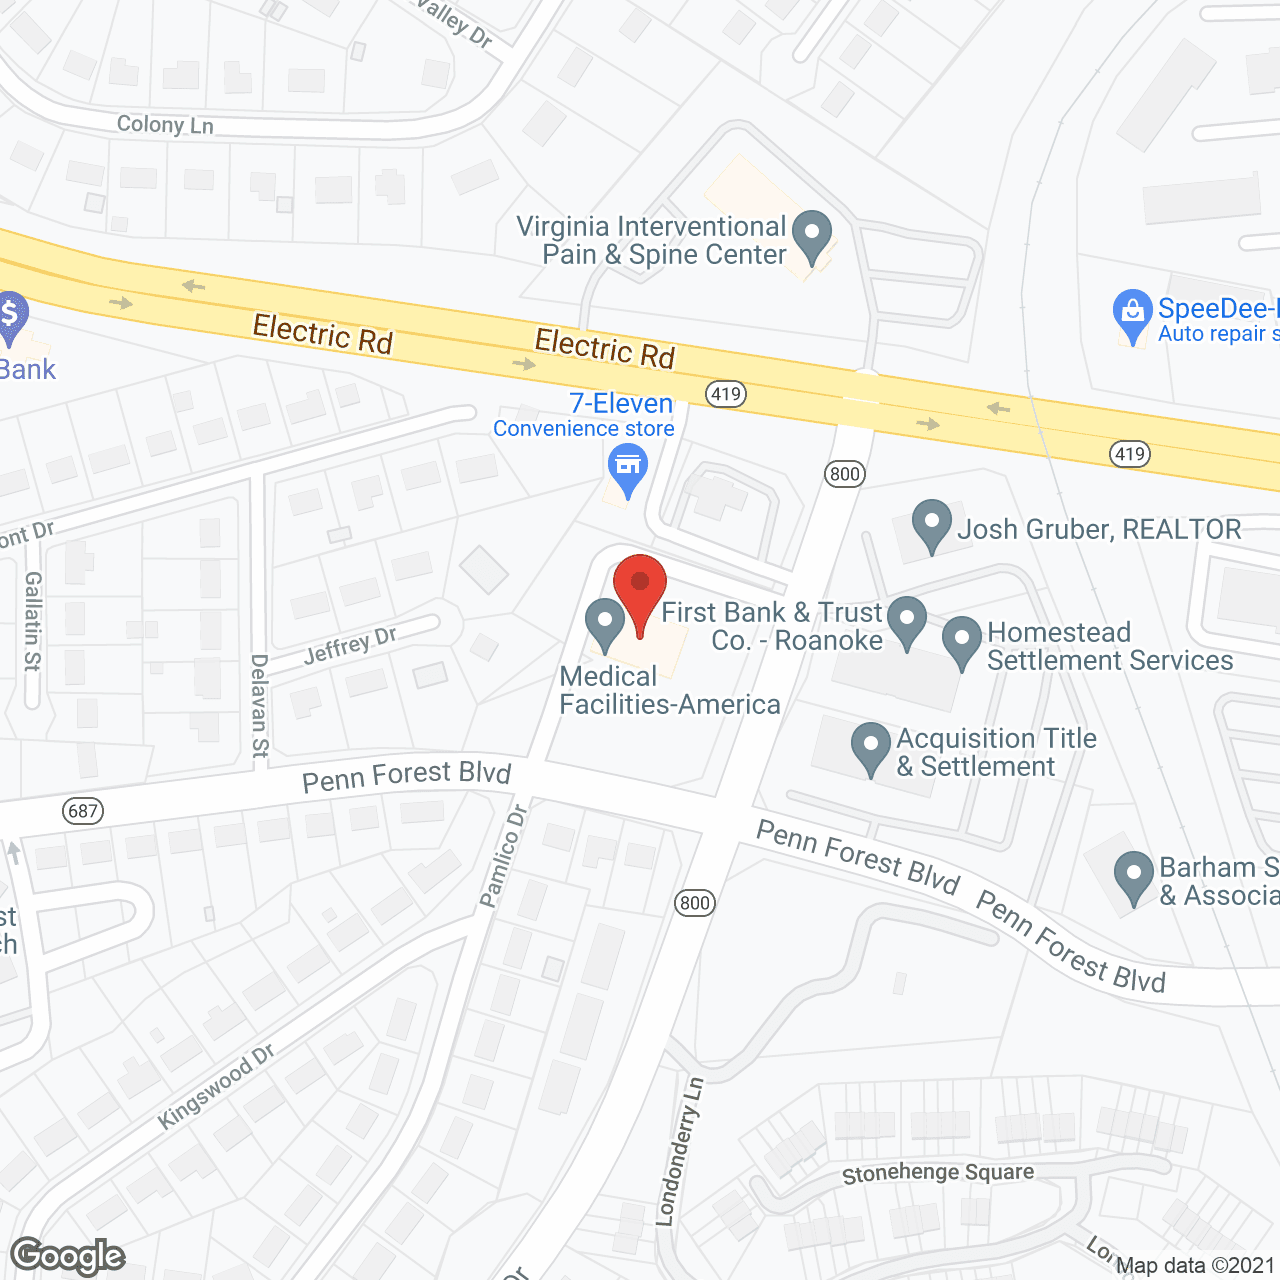 Res Care Home care in google map